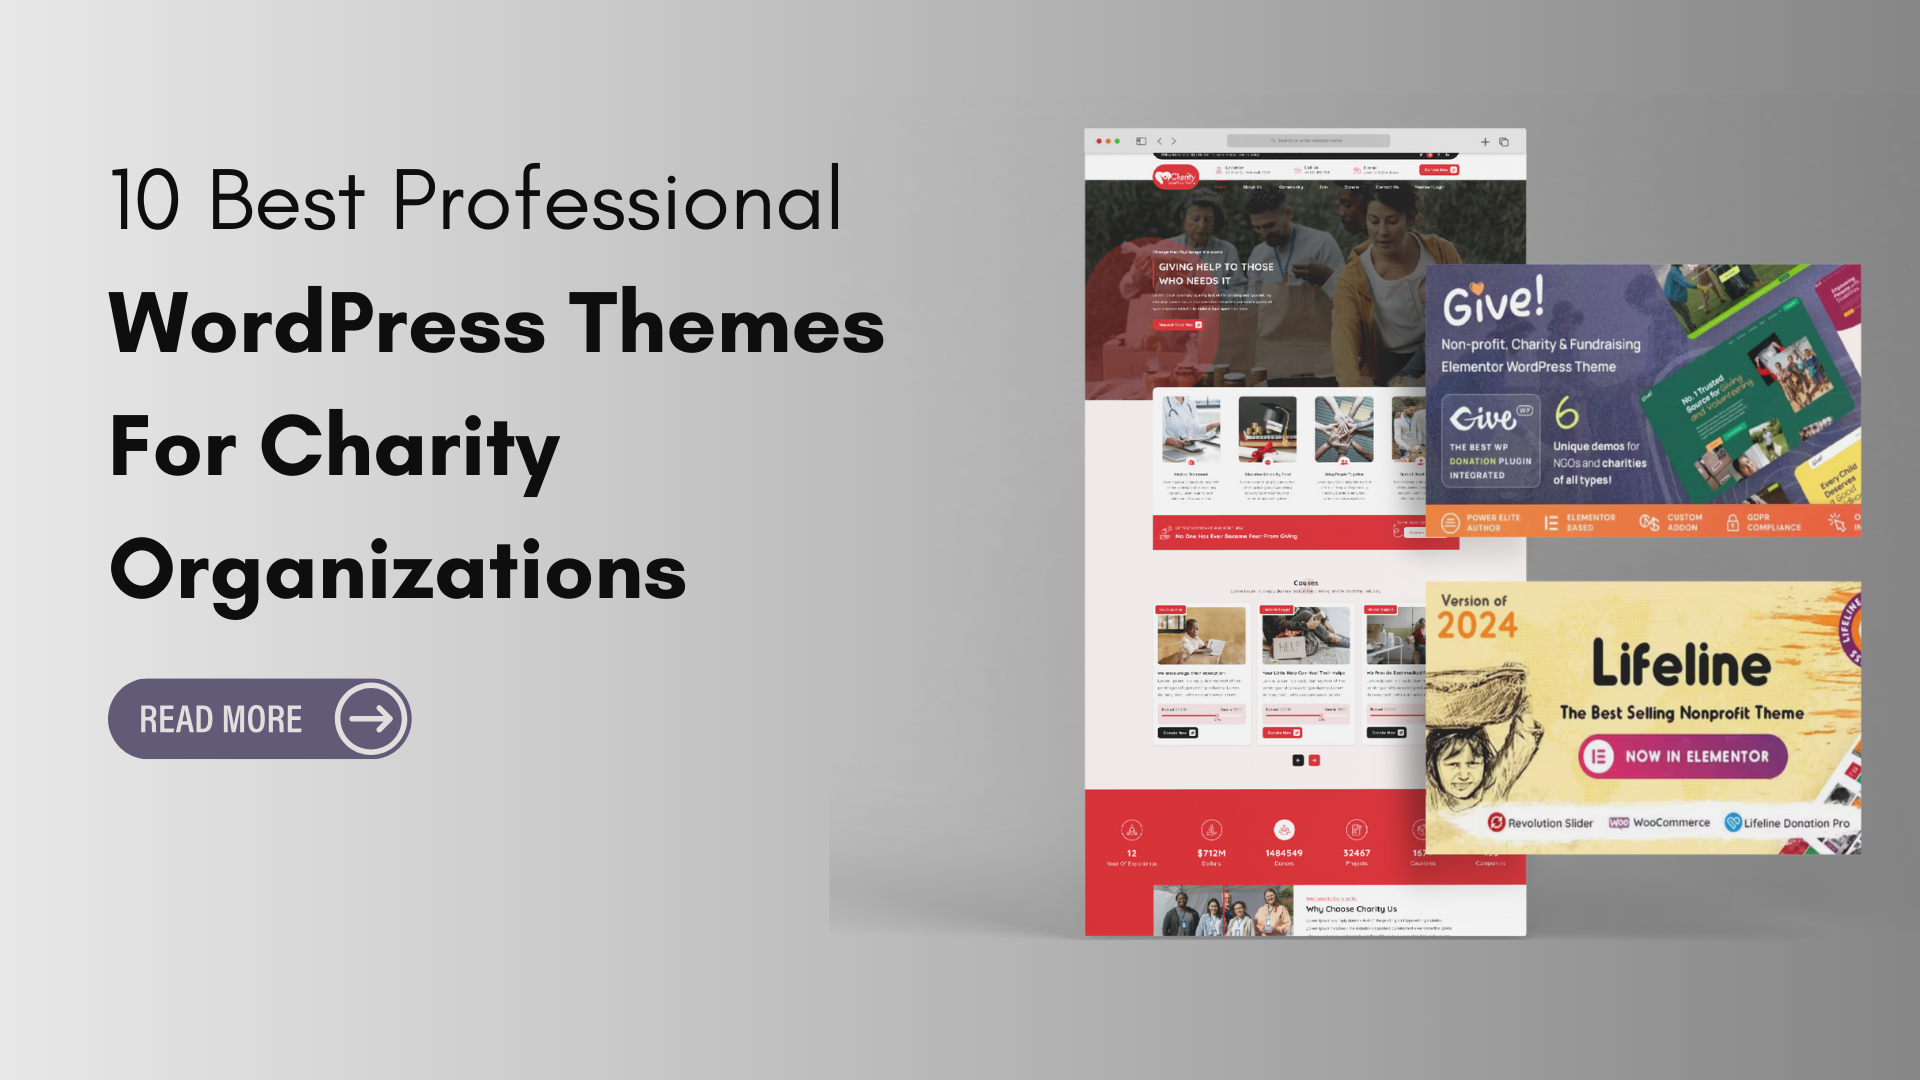 10 Best Professional WordPress Themes For Charity Organizations